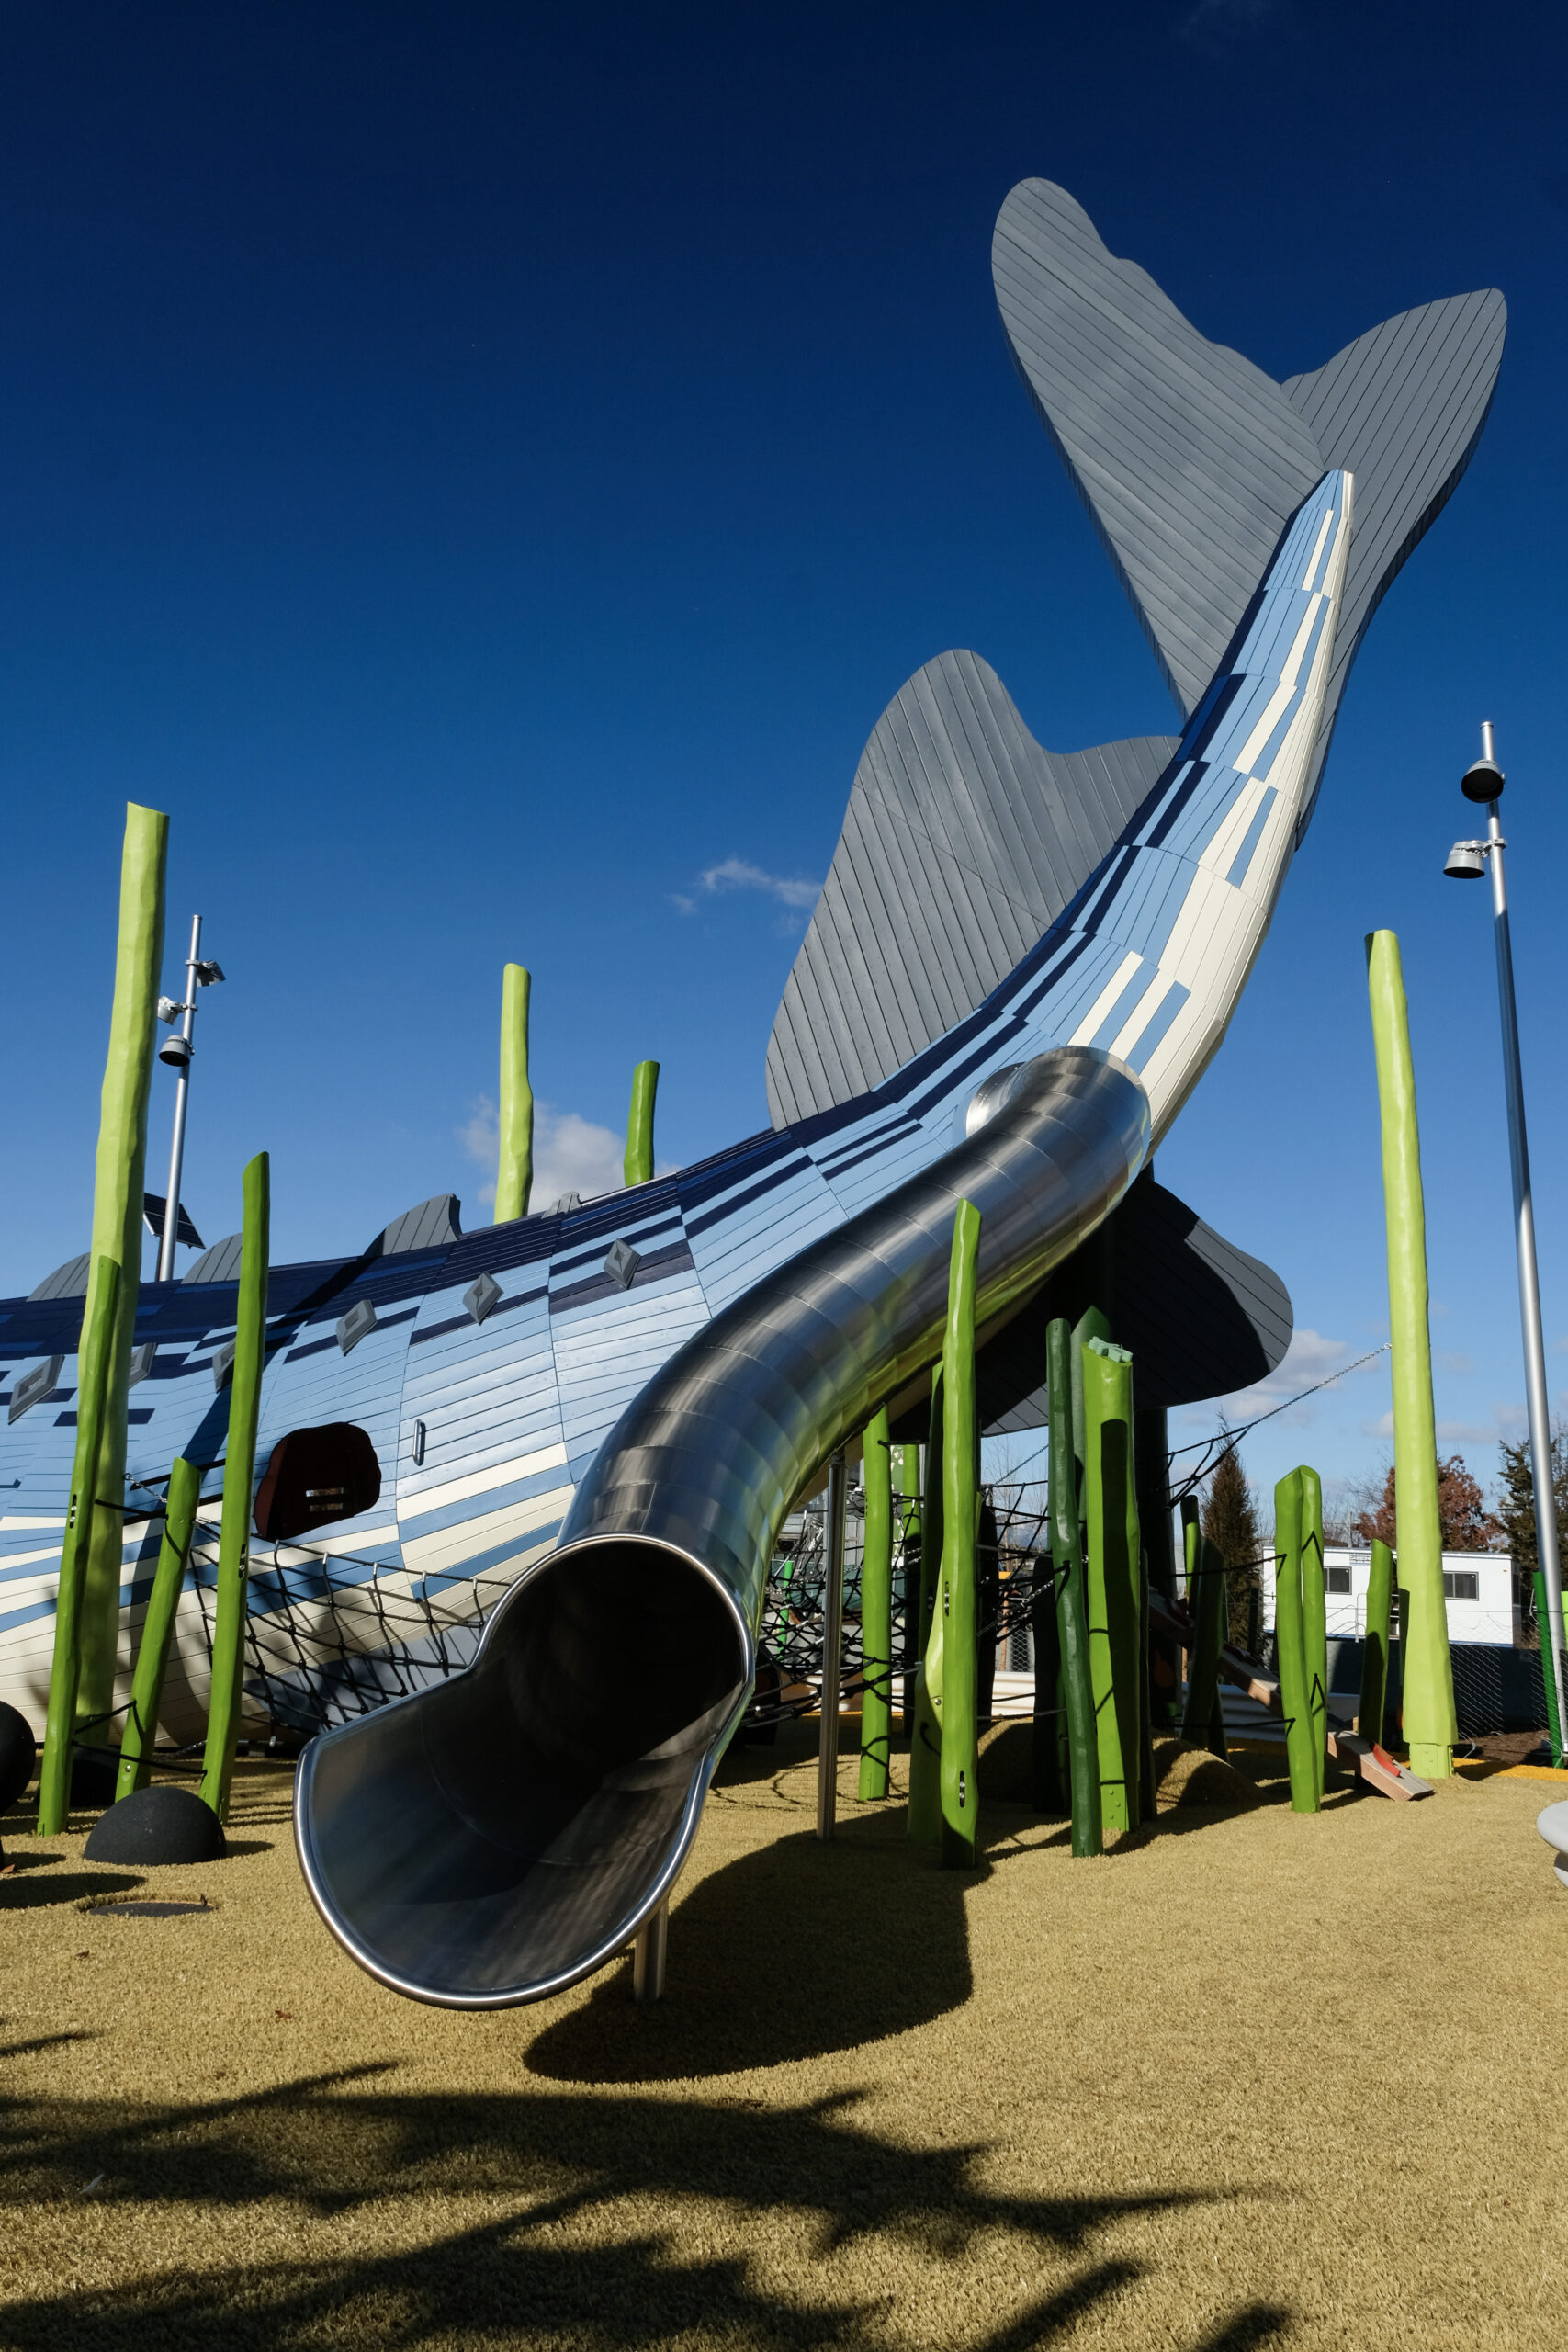 A playground structure shaped like a sturgeon with a slide coming out of its tail